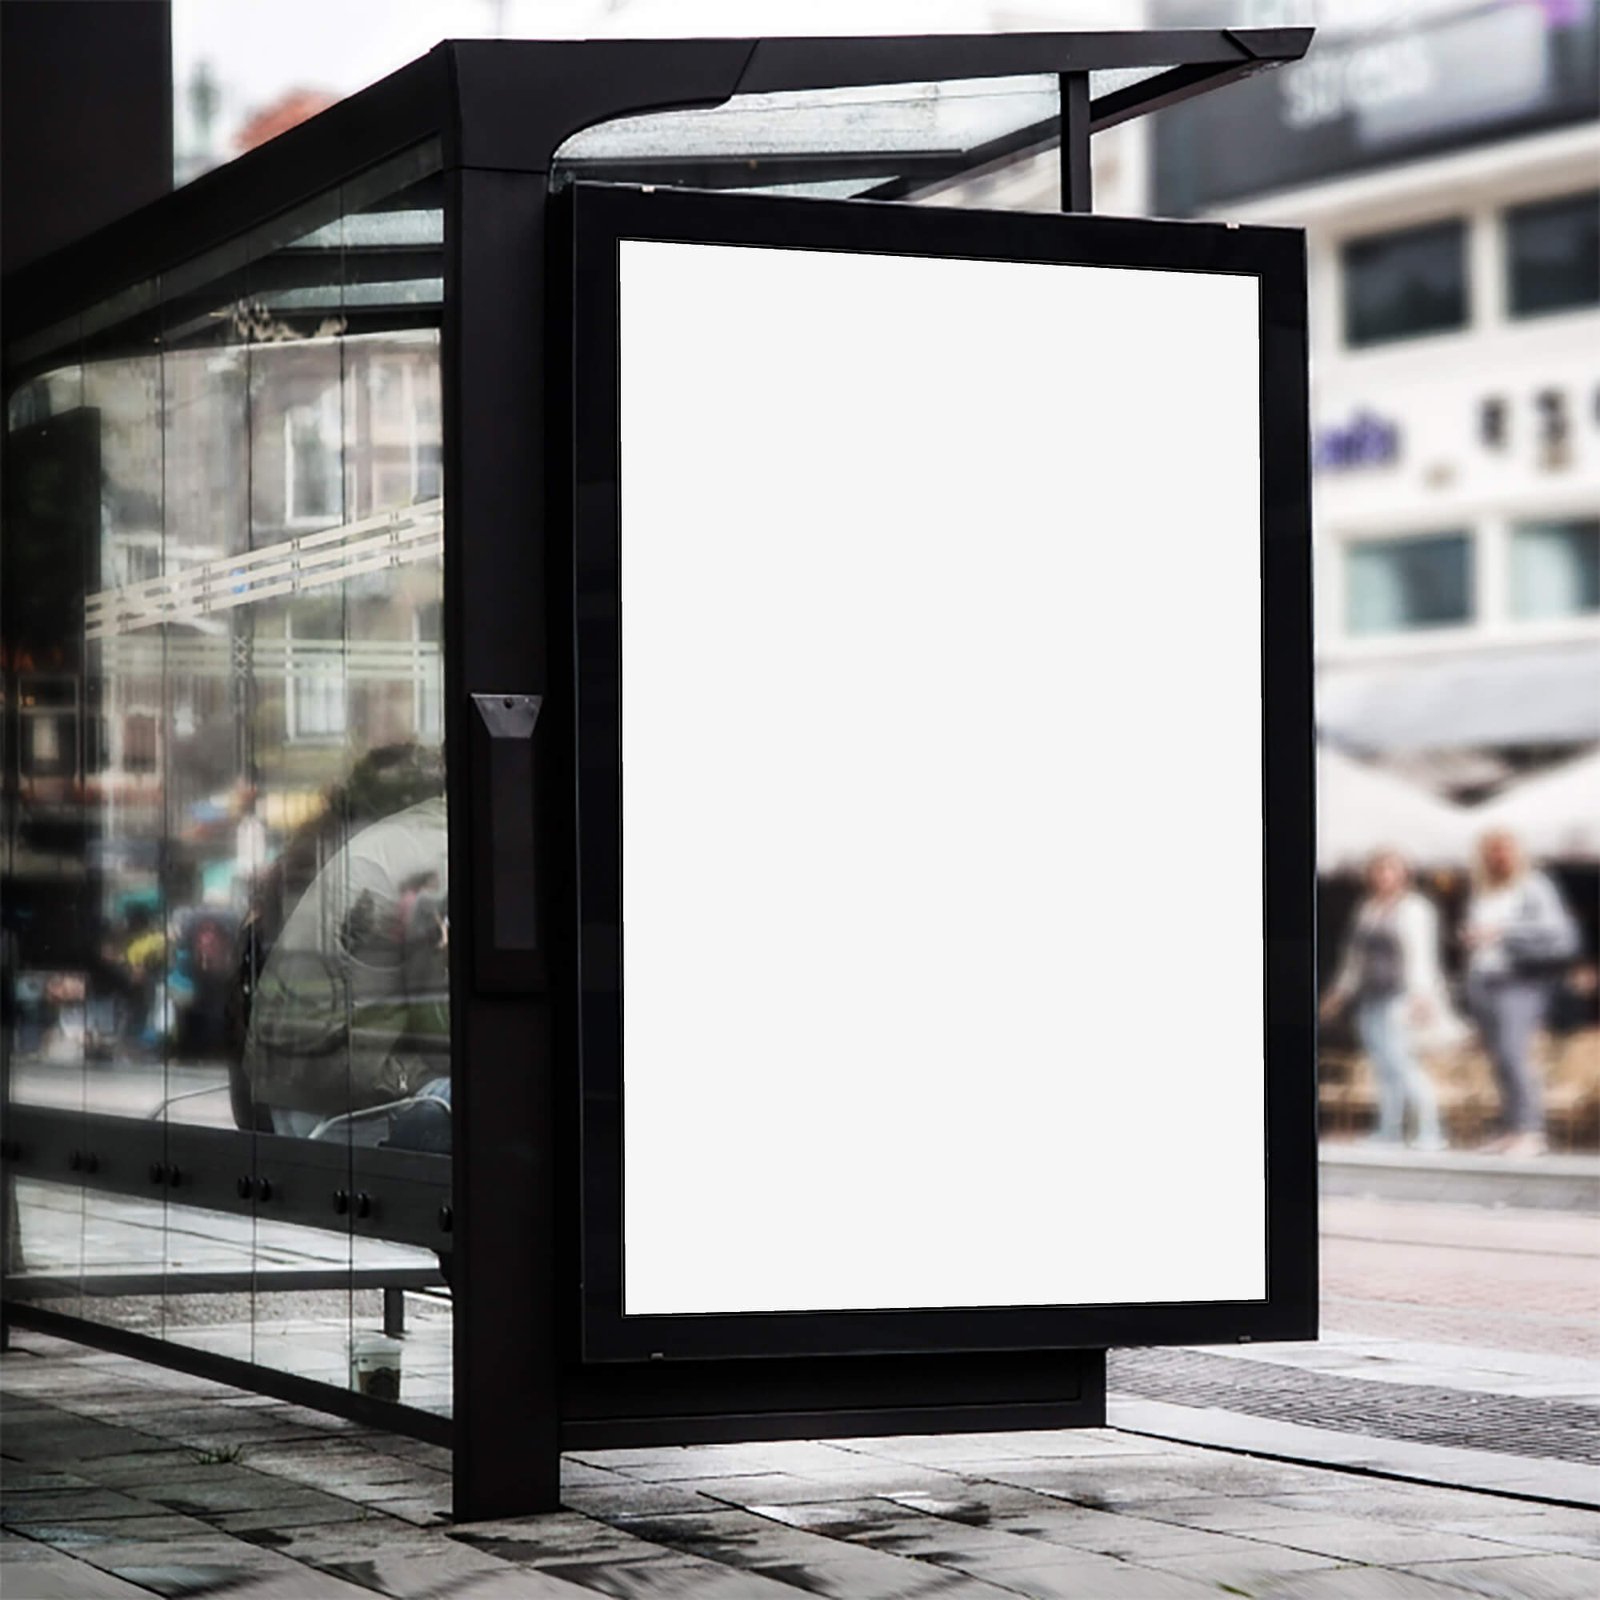 Blank Free Bus Shelter Mockup PSD Template